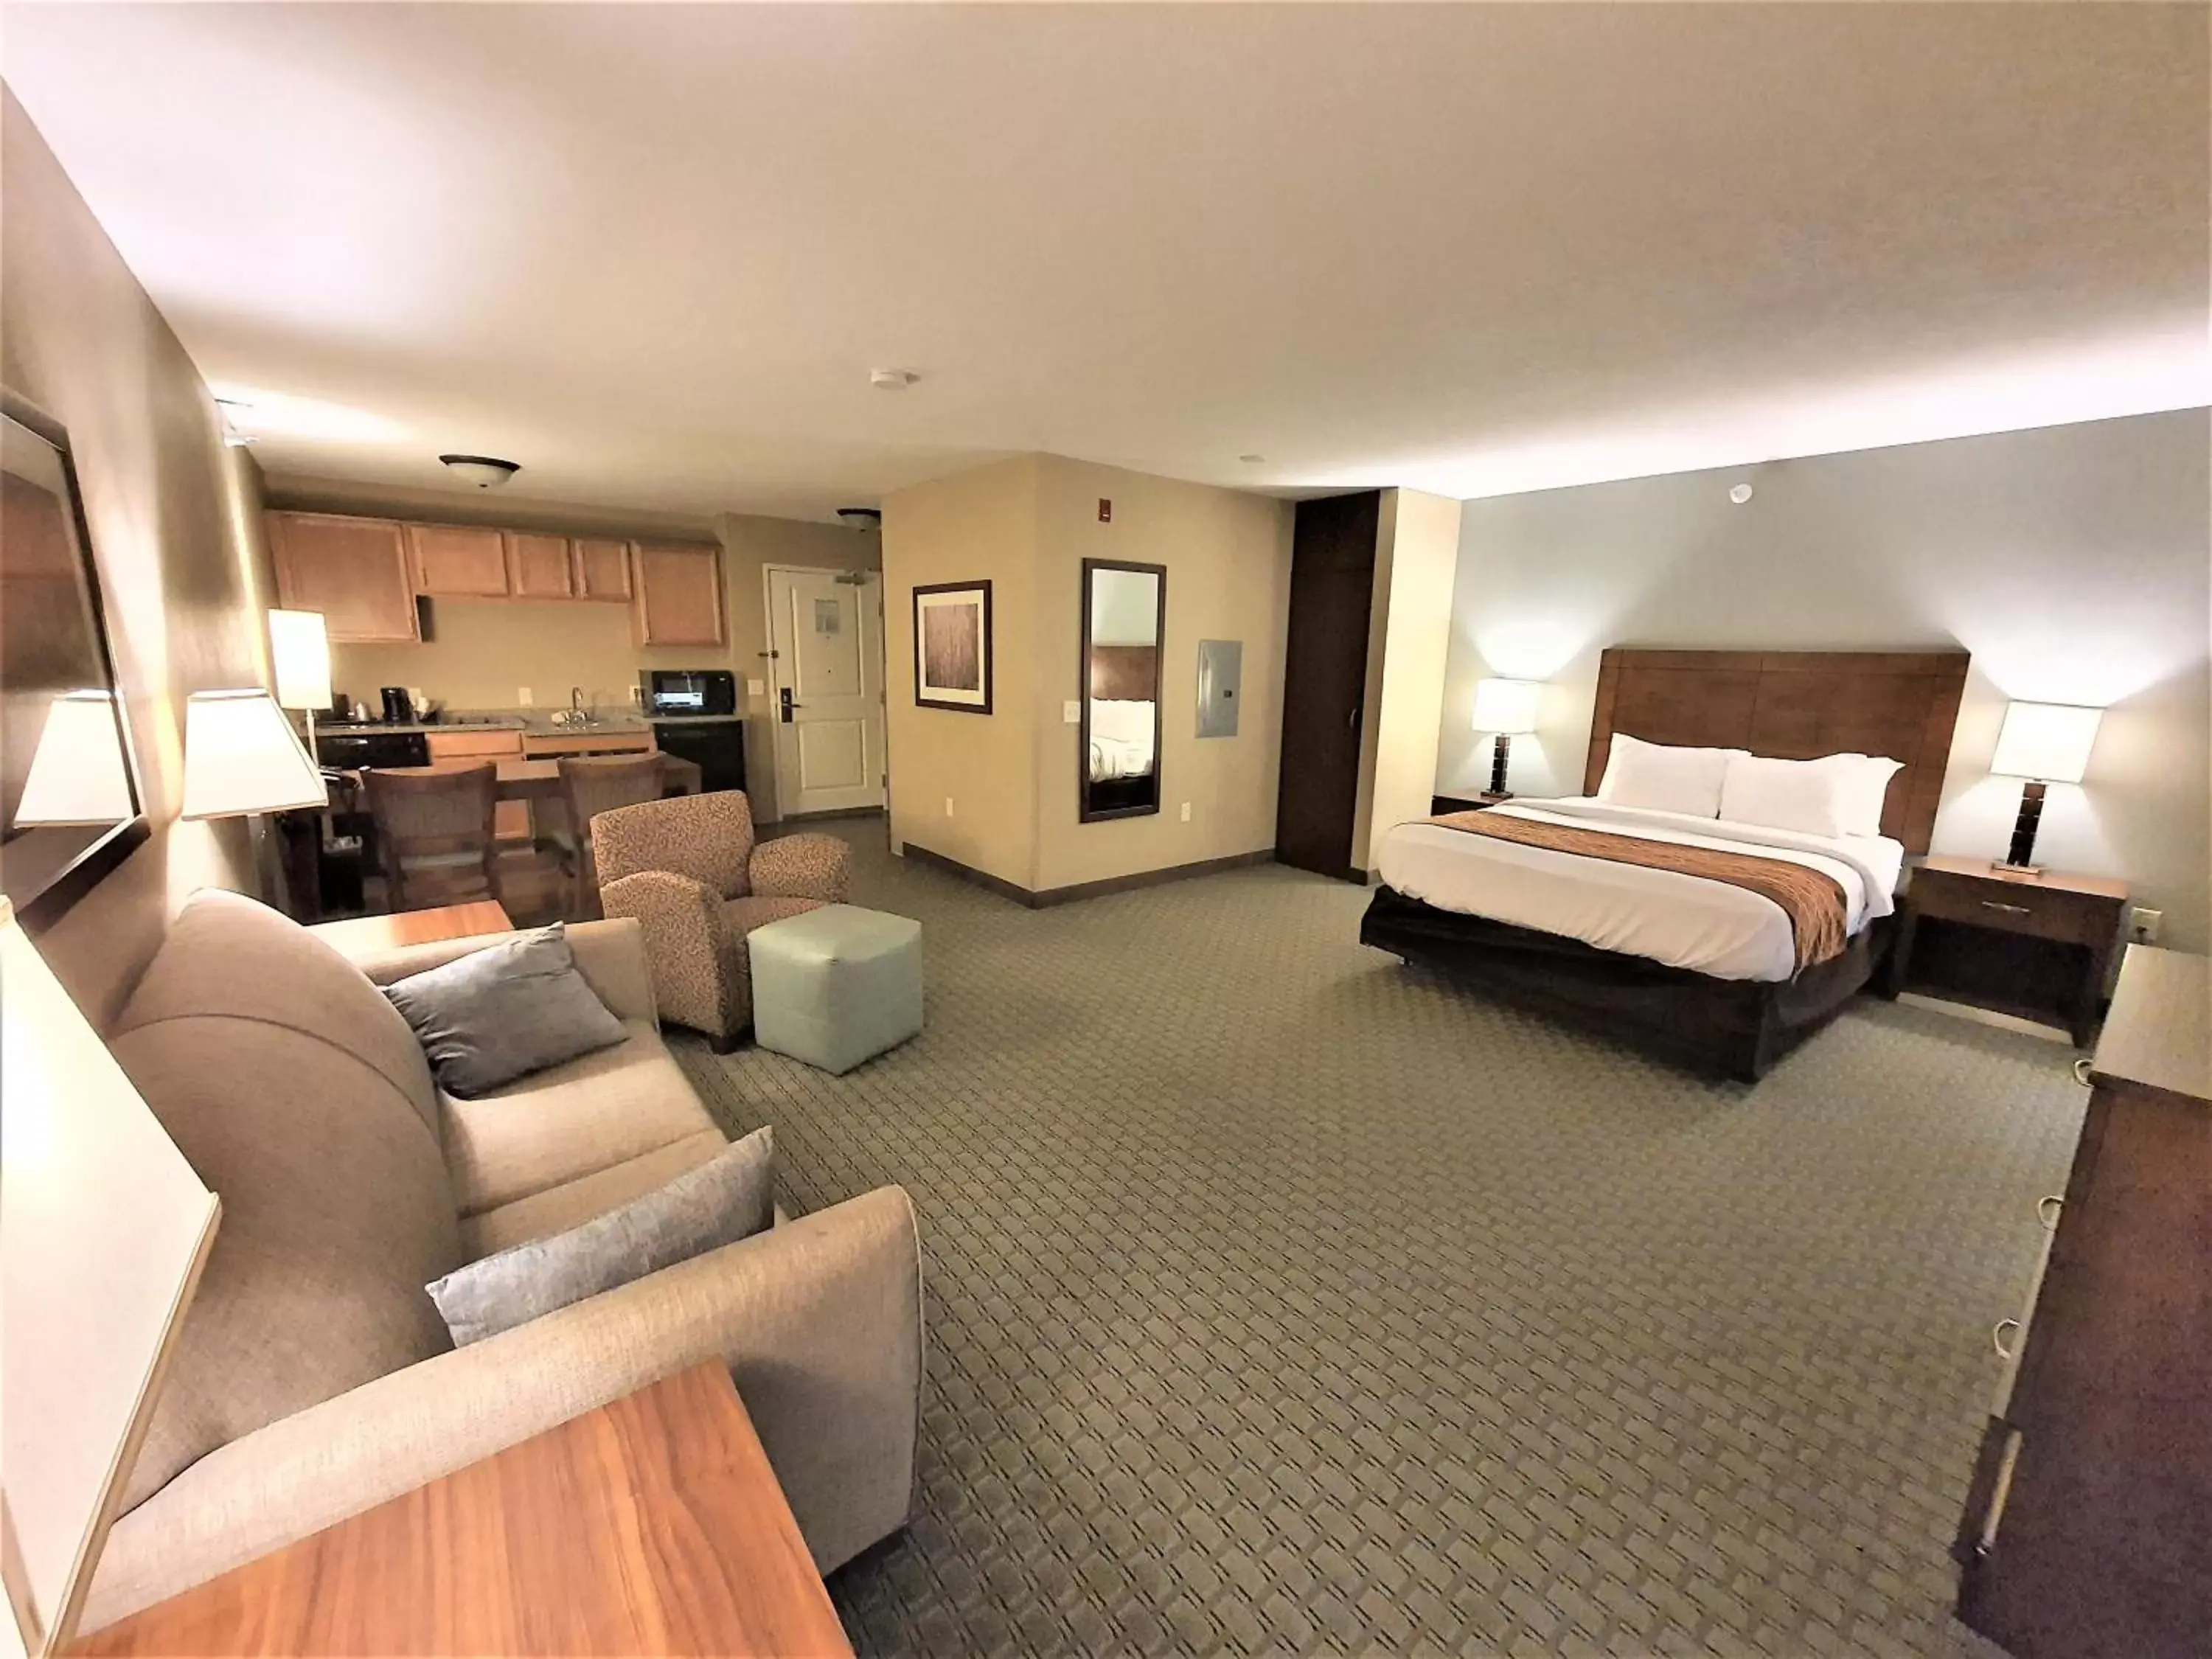 Room Photo in AmeriVu Inn and Suites - Chisago City